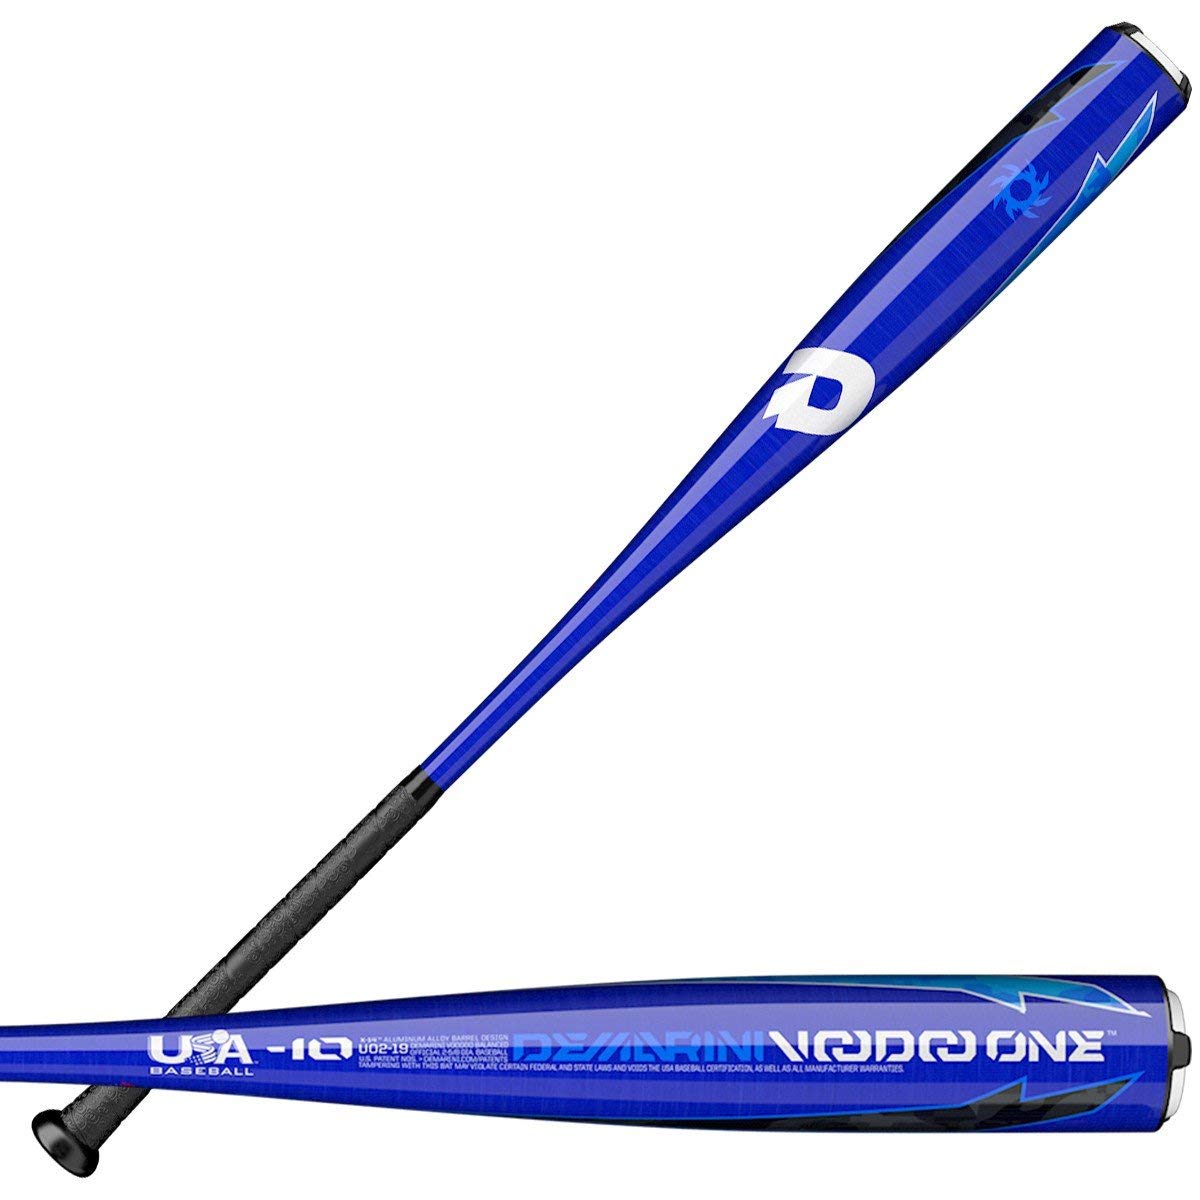 `-10 Length to Weight Ratio Balanced Swing Weight One-Piece, 100% X14 Alloy Construction Approved for play in USA Baseball The 2019 DeMarini Voodoo One (-10) 2 5/8 Balanced USA Baseball bat is a great light-swinging option for the junior high aged player who prefers the feel of a one-piece aluminum bat. DeMarini's X14 Alloy allows for more precise weight distribution and the 3Fusion End Cap and X-Lite knob optimizes the bat's sweet spot for a sound and feel that players love. Comes with a 1 year manufacturer's warranty from DeMarini. - -10 Length to Weight Ratio - 2 5/8 Inch Barrel Diameter - Balanced Swing Weight - One-Piece, 100% X14 Alloy Construction - 3Fusion End Cap - XLite Knob - Approved for play in USA Baseball - 1 Year Manufacturer's Warranty